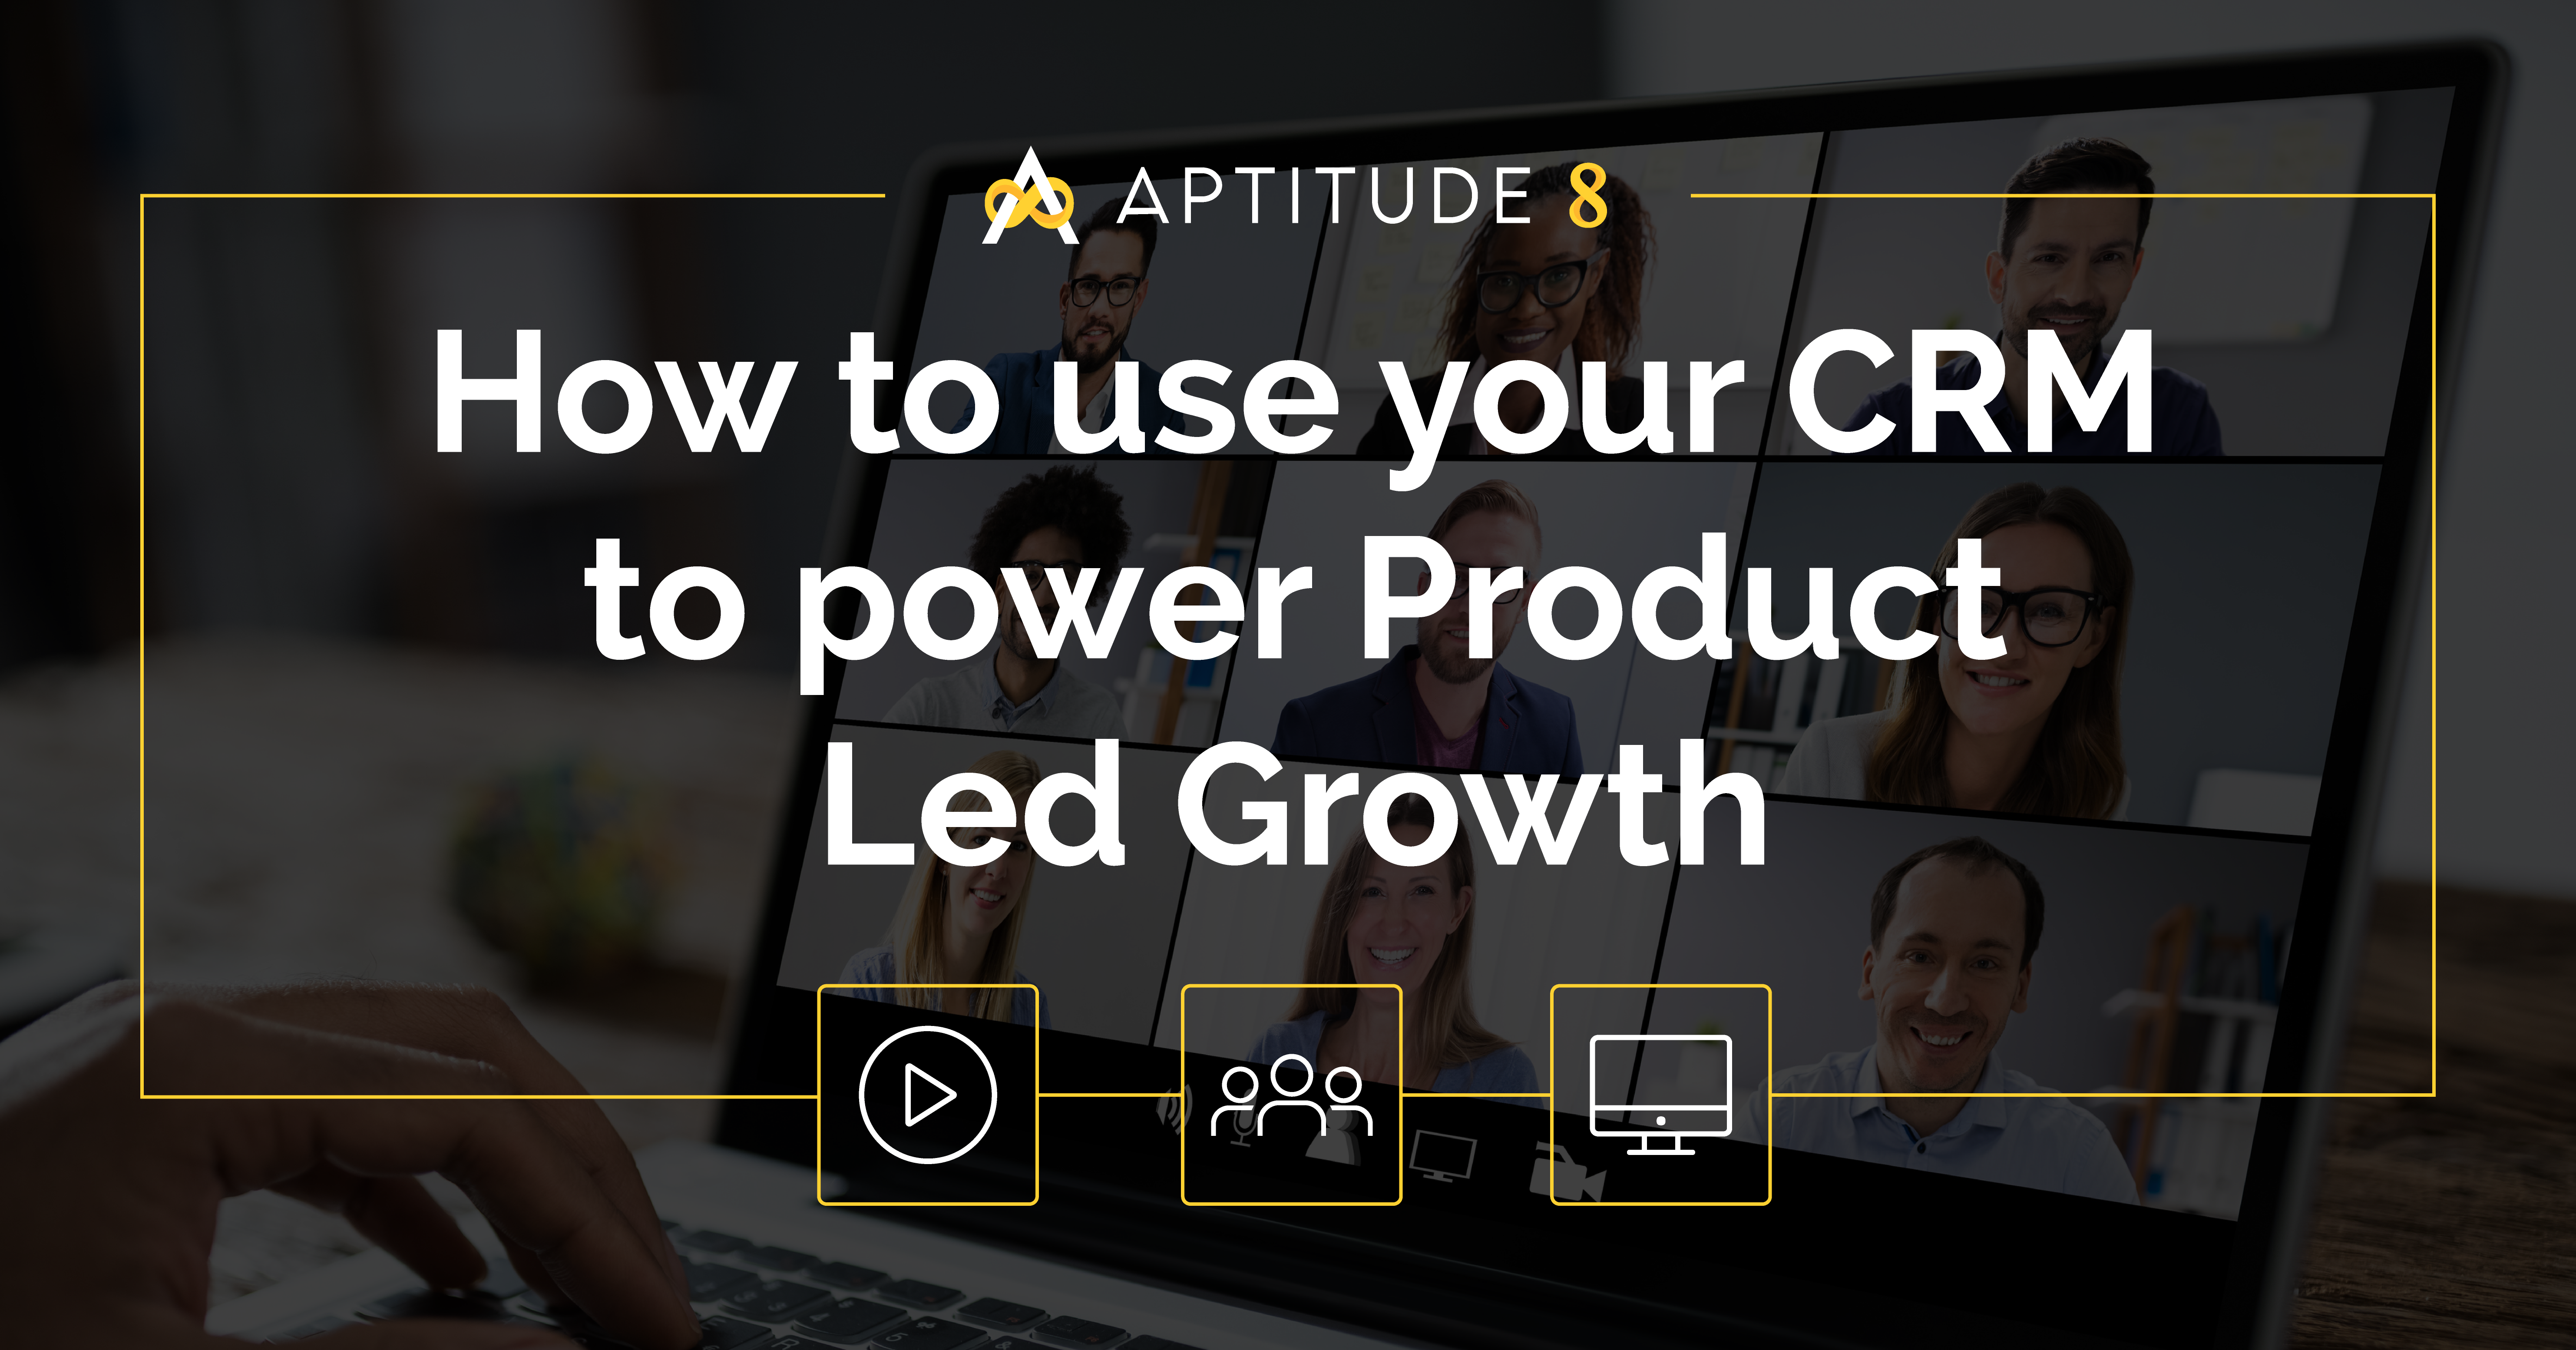 How to use your CRM to power Product Led Growth